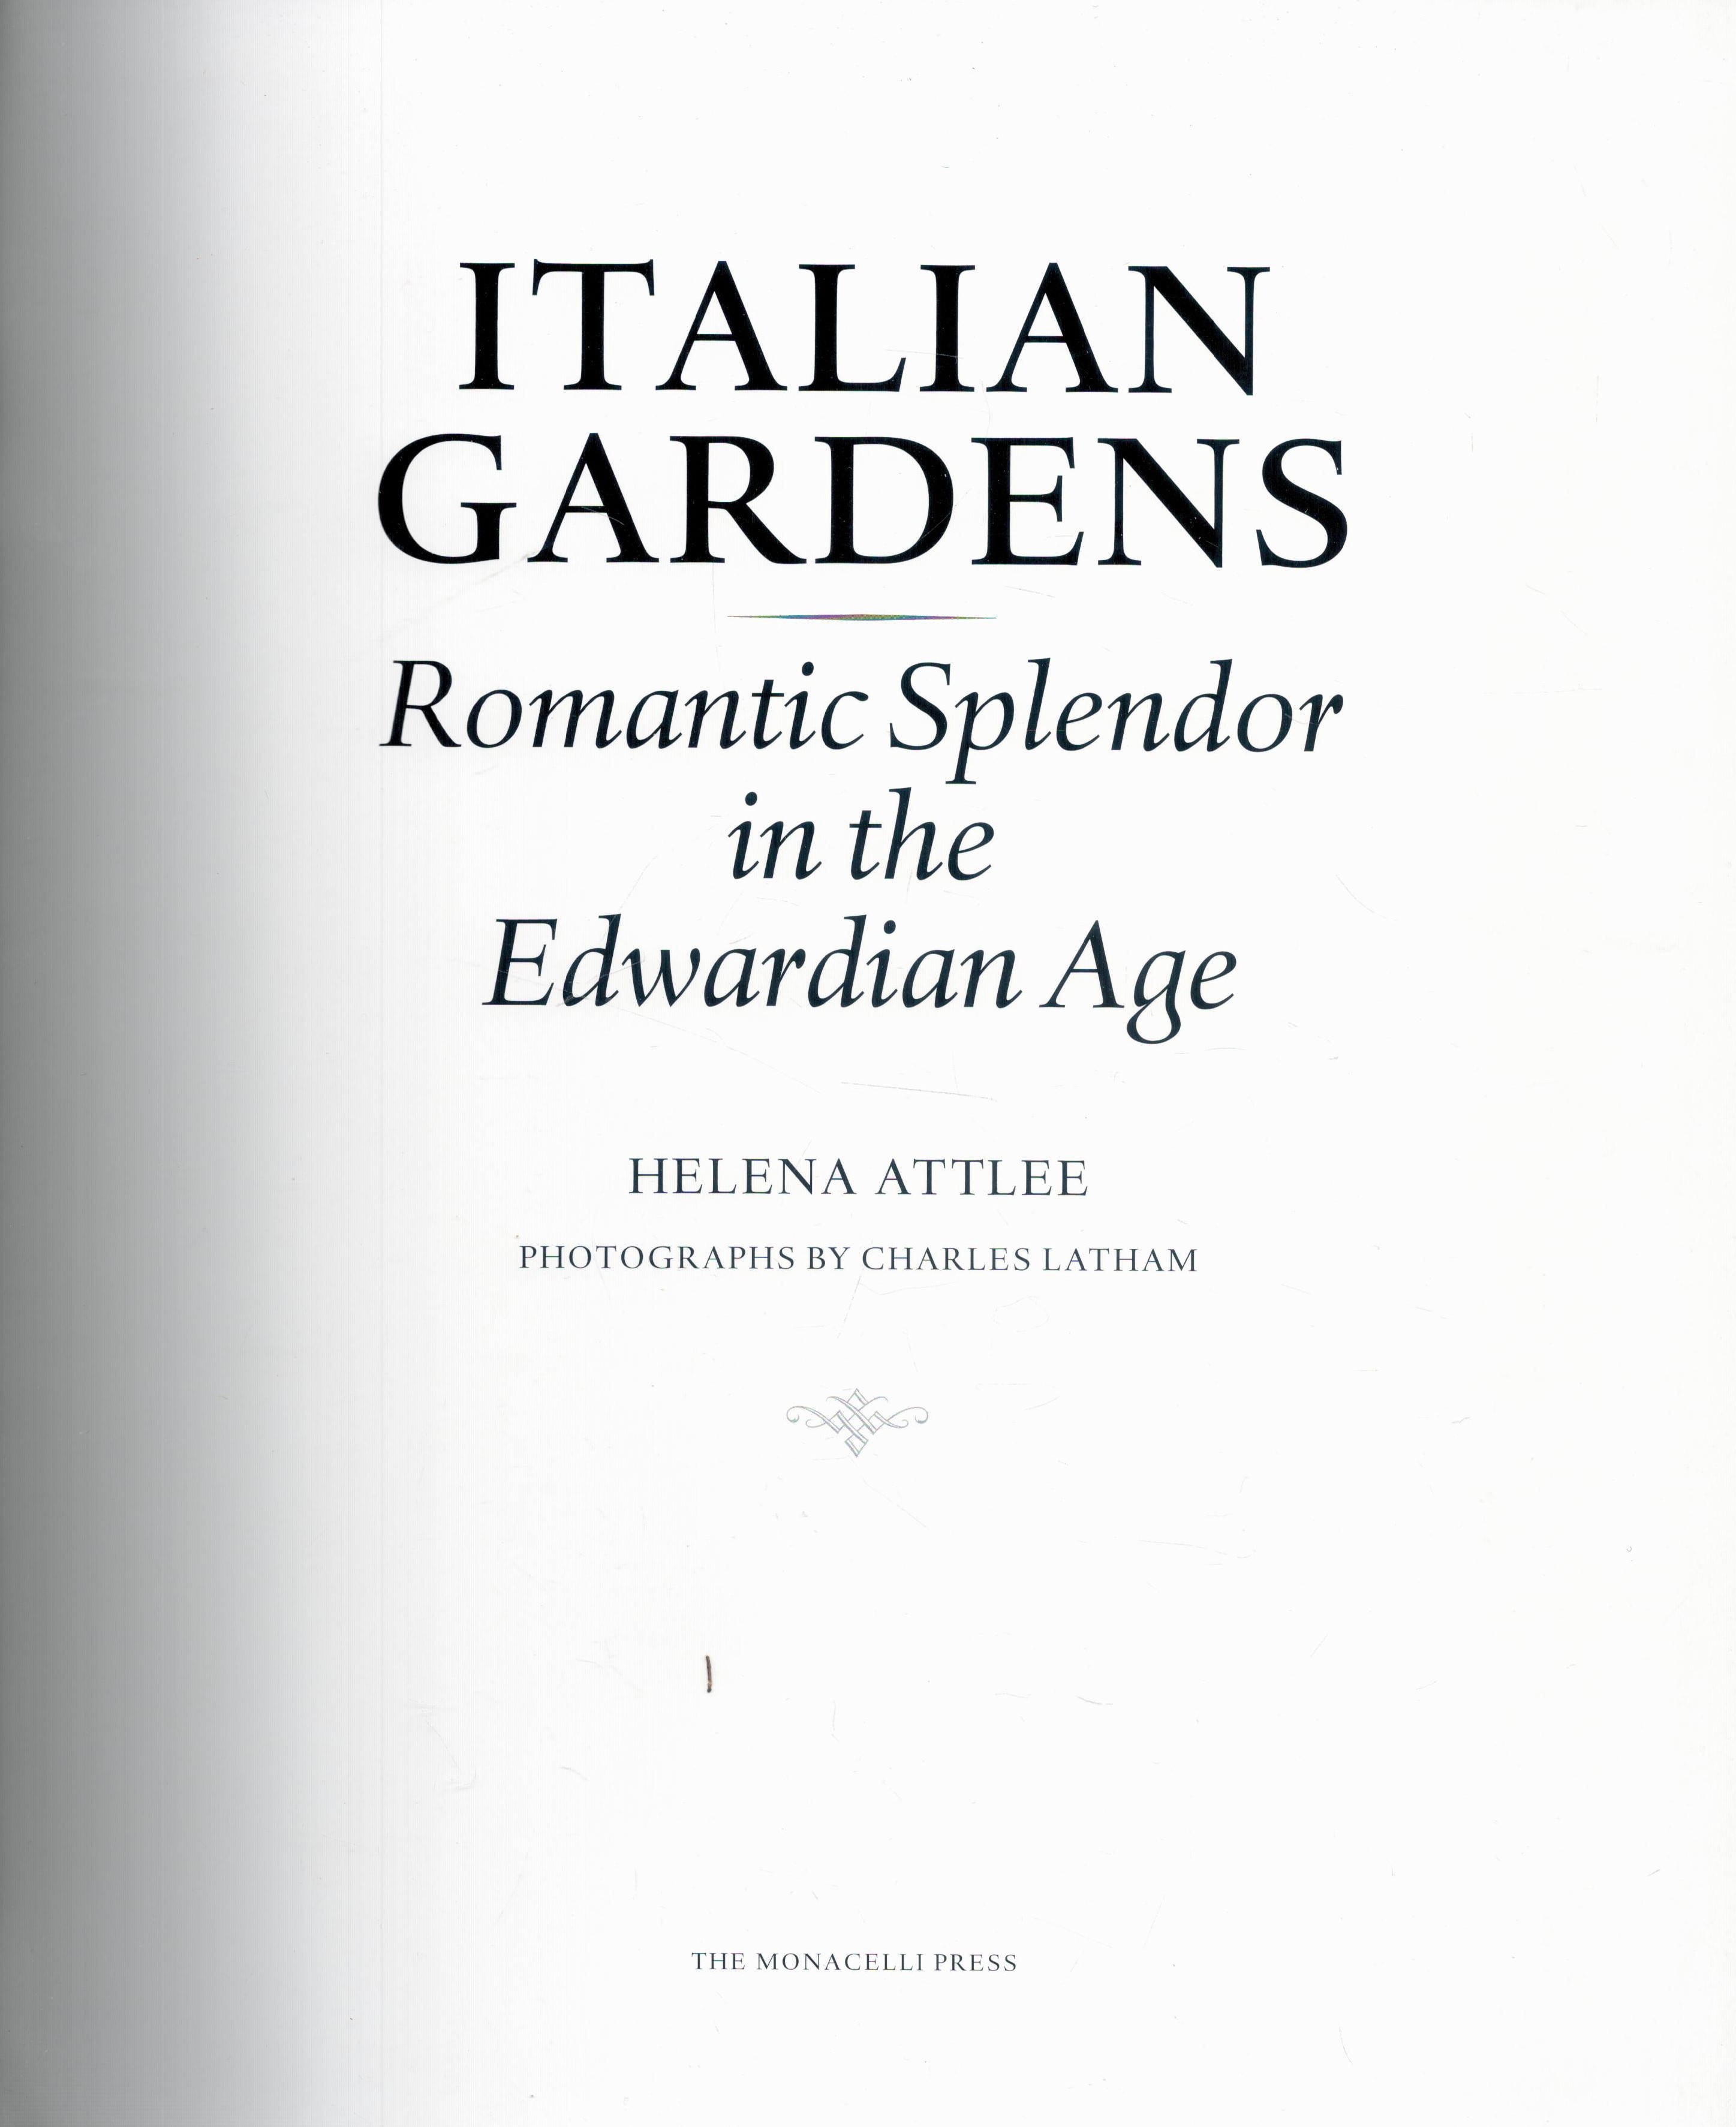 Italian Gardens - Romantic Splendor in the Edwardian Age by Helena Latham 2009 First Edition - Image 2 of 3